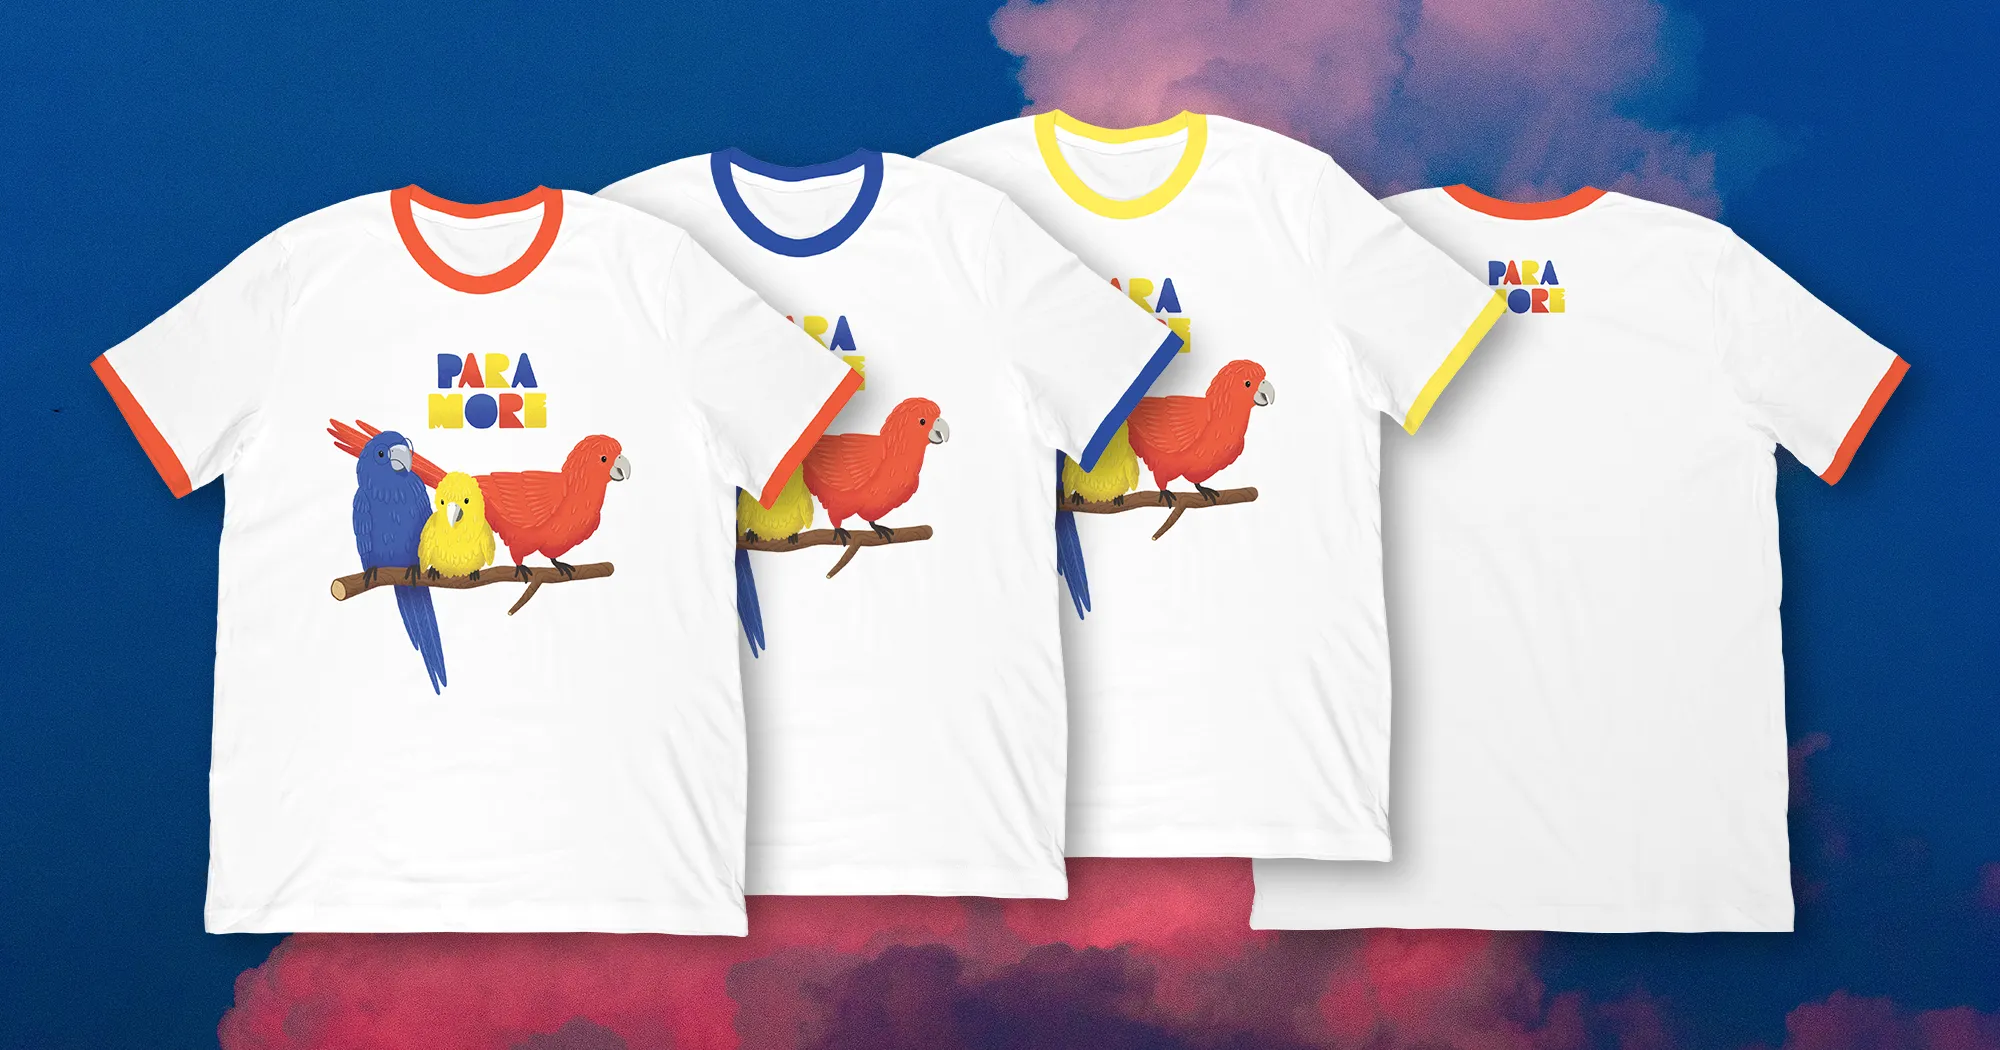 Paramore Impericon: T-shirts in a row featuring the parrots design.